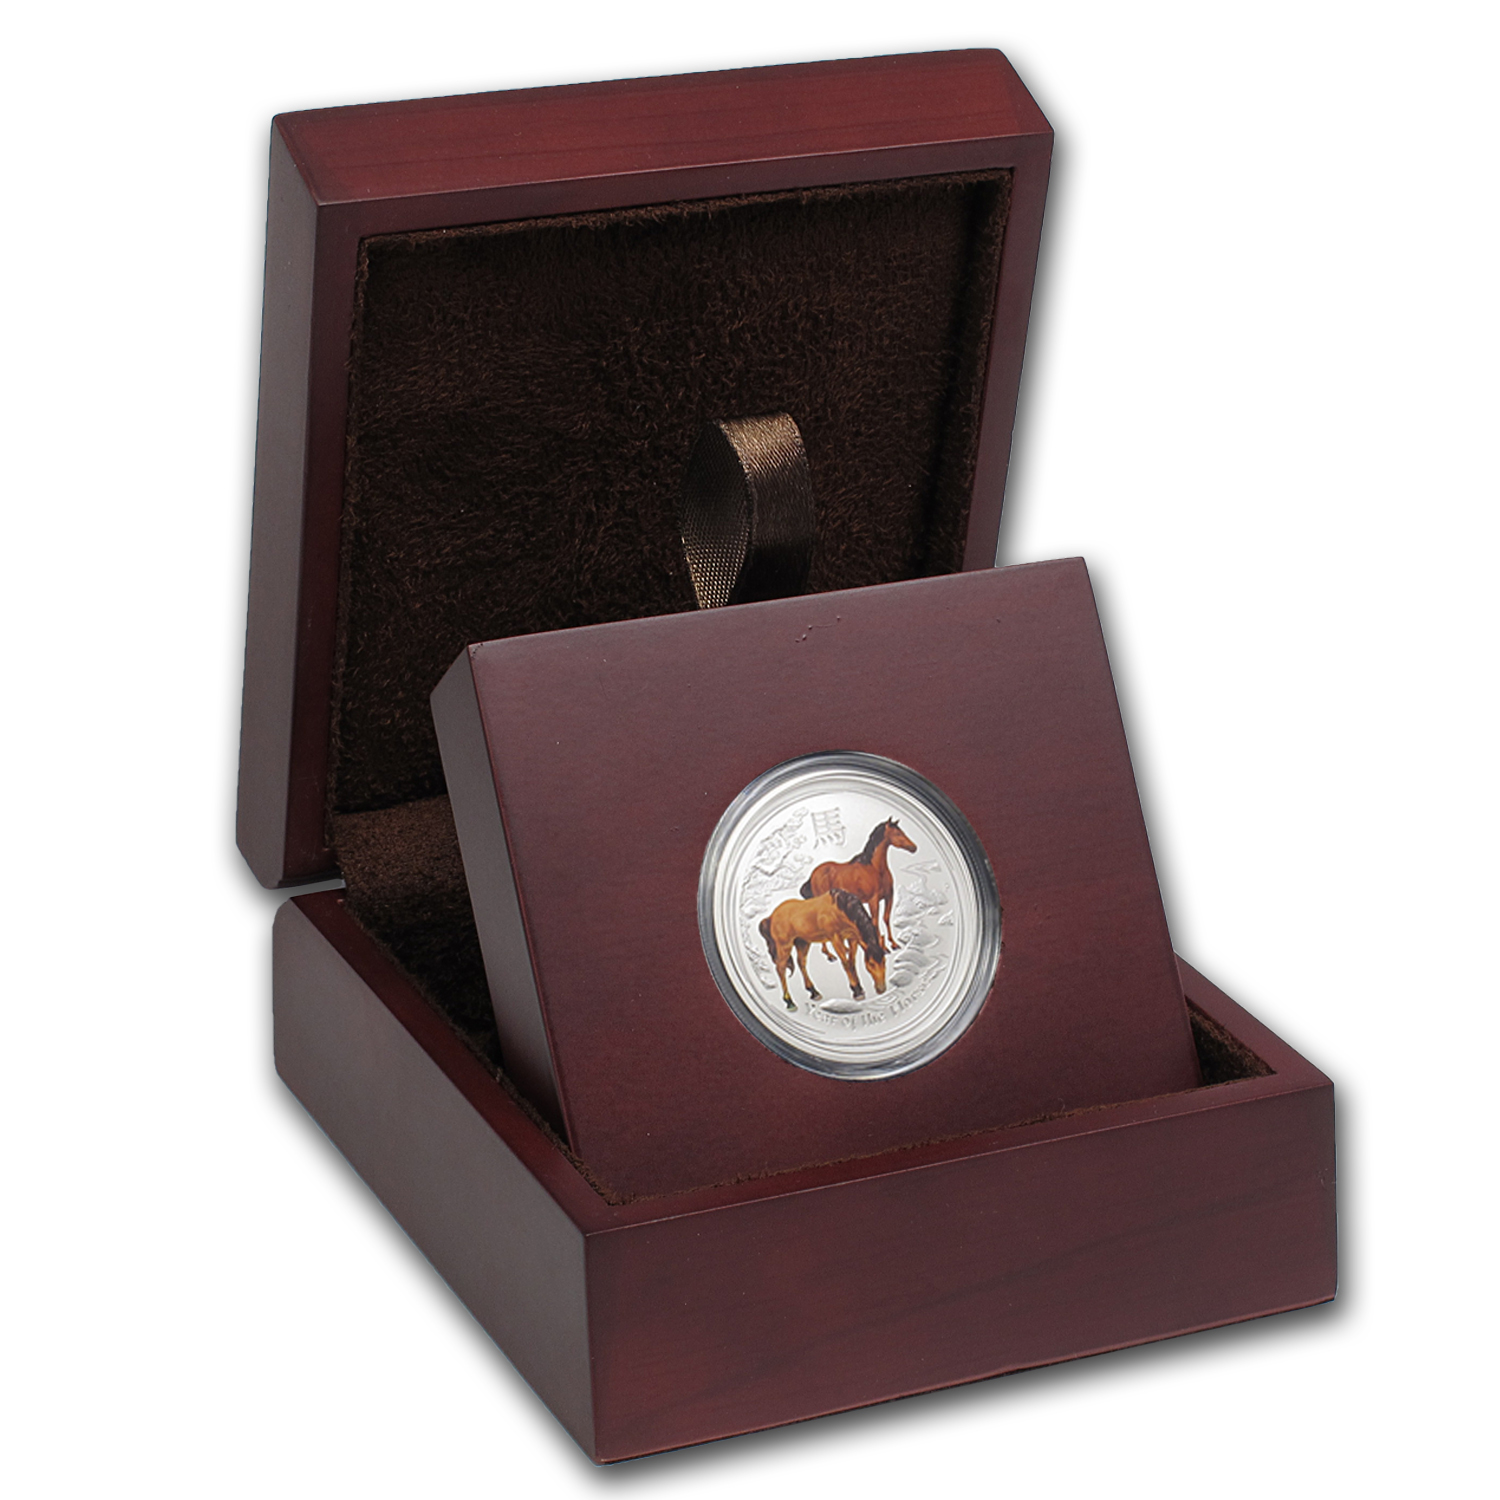 Buy APMEX Wood Gift Box - 1/2 oz Perth Mint Silver Coin Series 2 - Click Image to Close